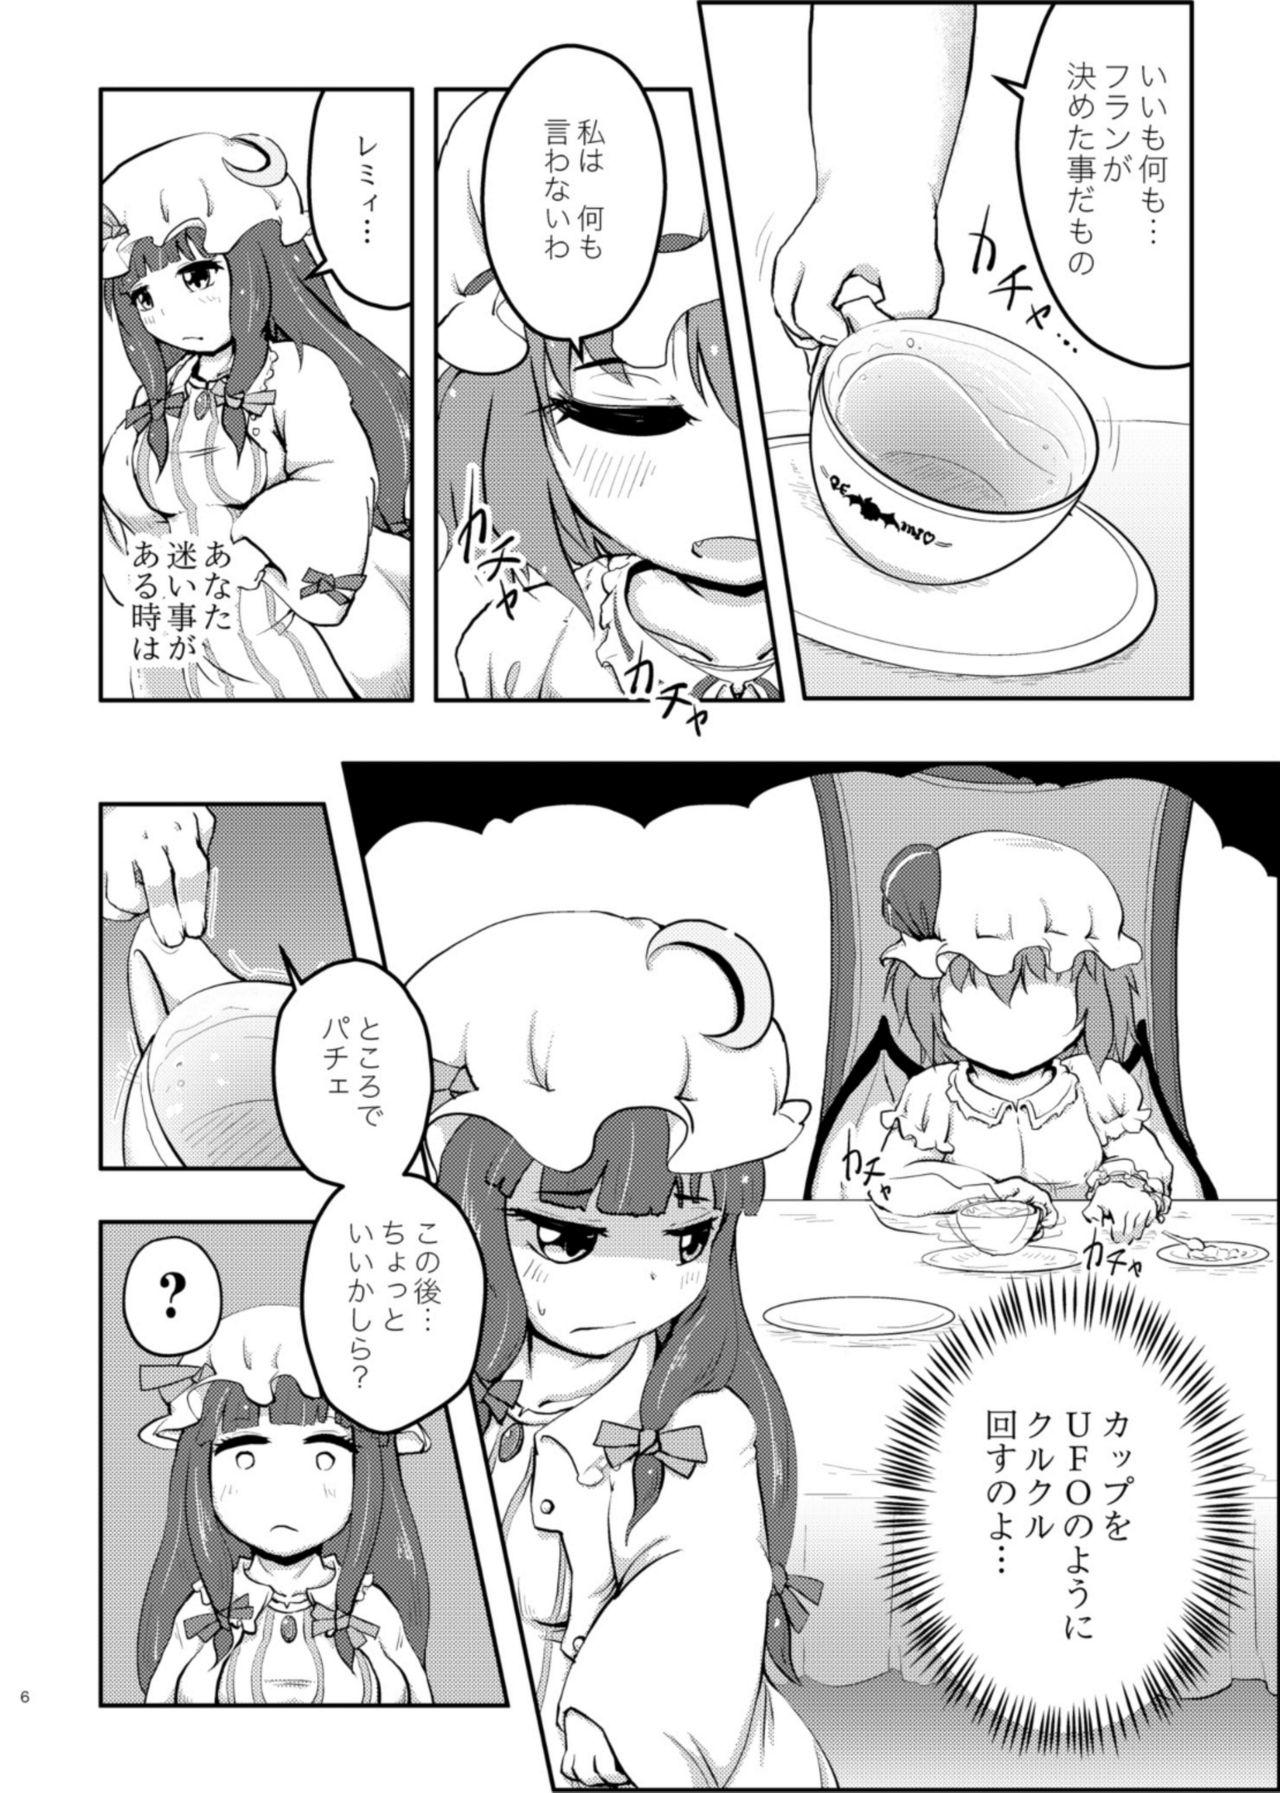 Sloppy Blowjob Scarlet Conflict 2 - Touhou project She - Page 6